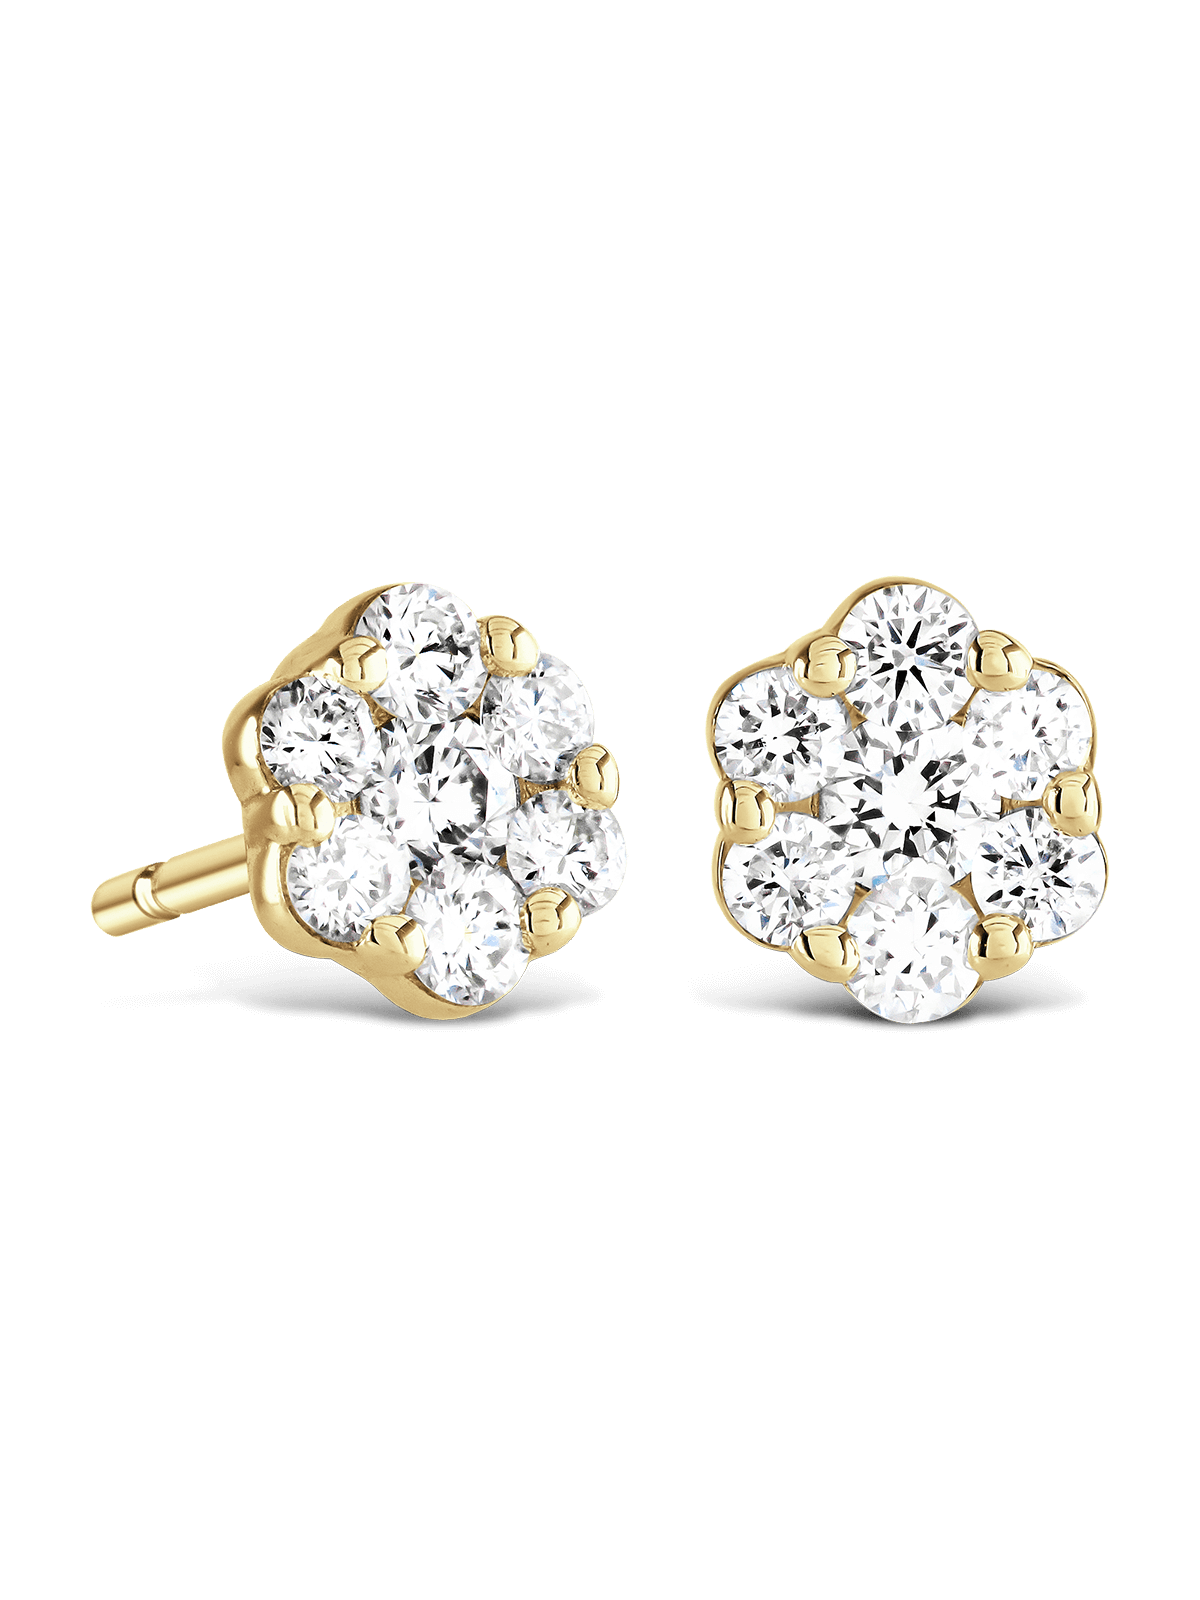 Brown & Newirth Bella 0.30ct Brilliant Cut Diamond Cluster Earrings in 9ct Yellow Gold